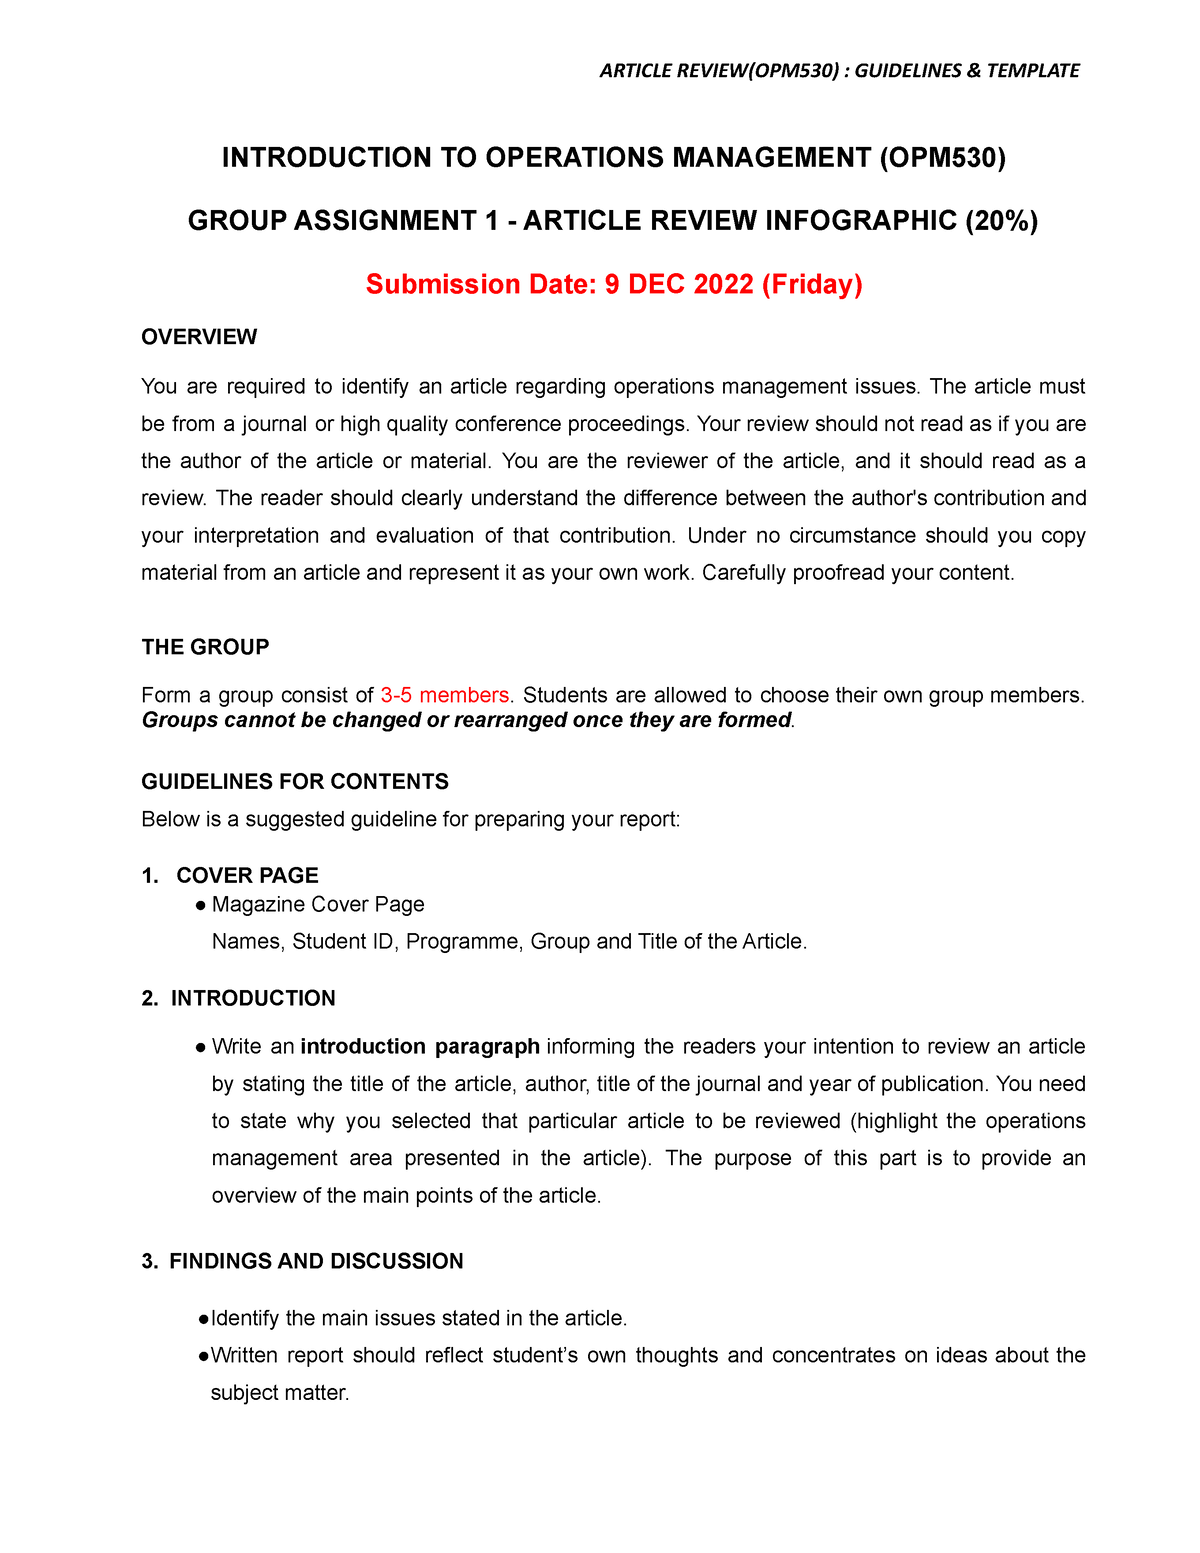 group assignment opm530